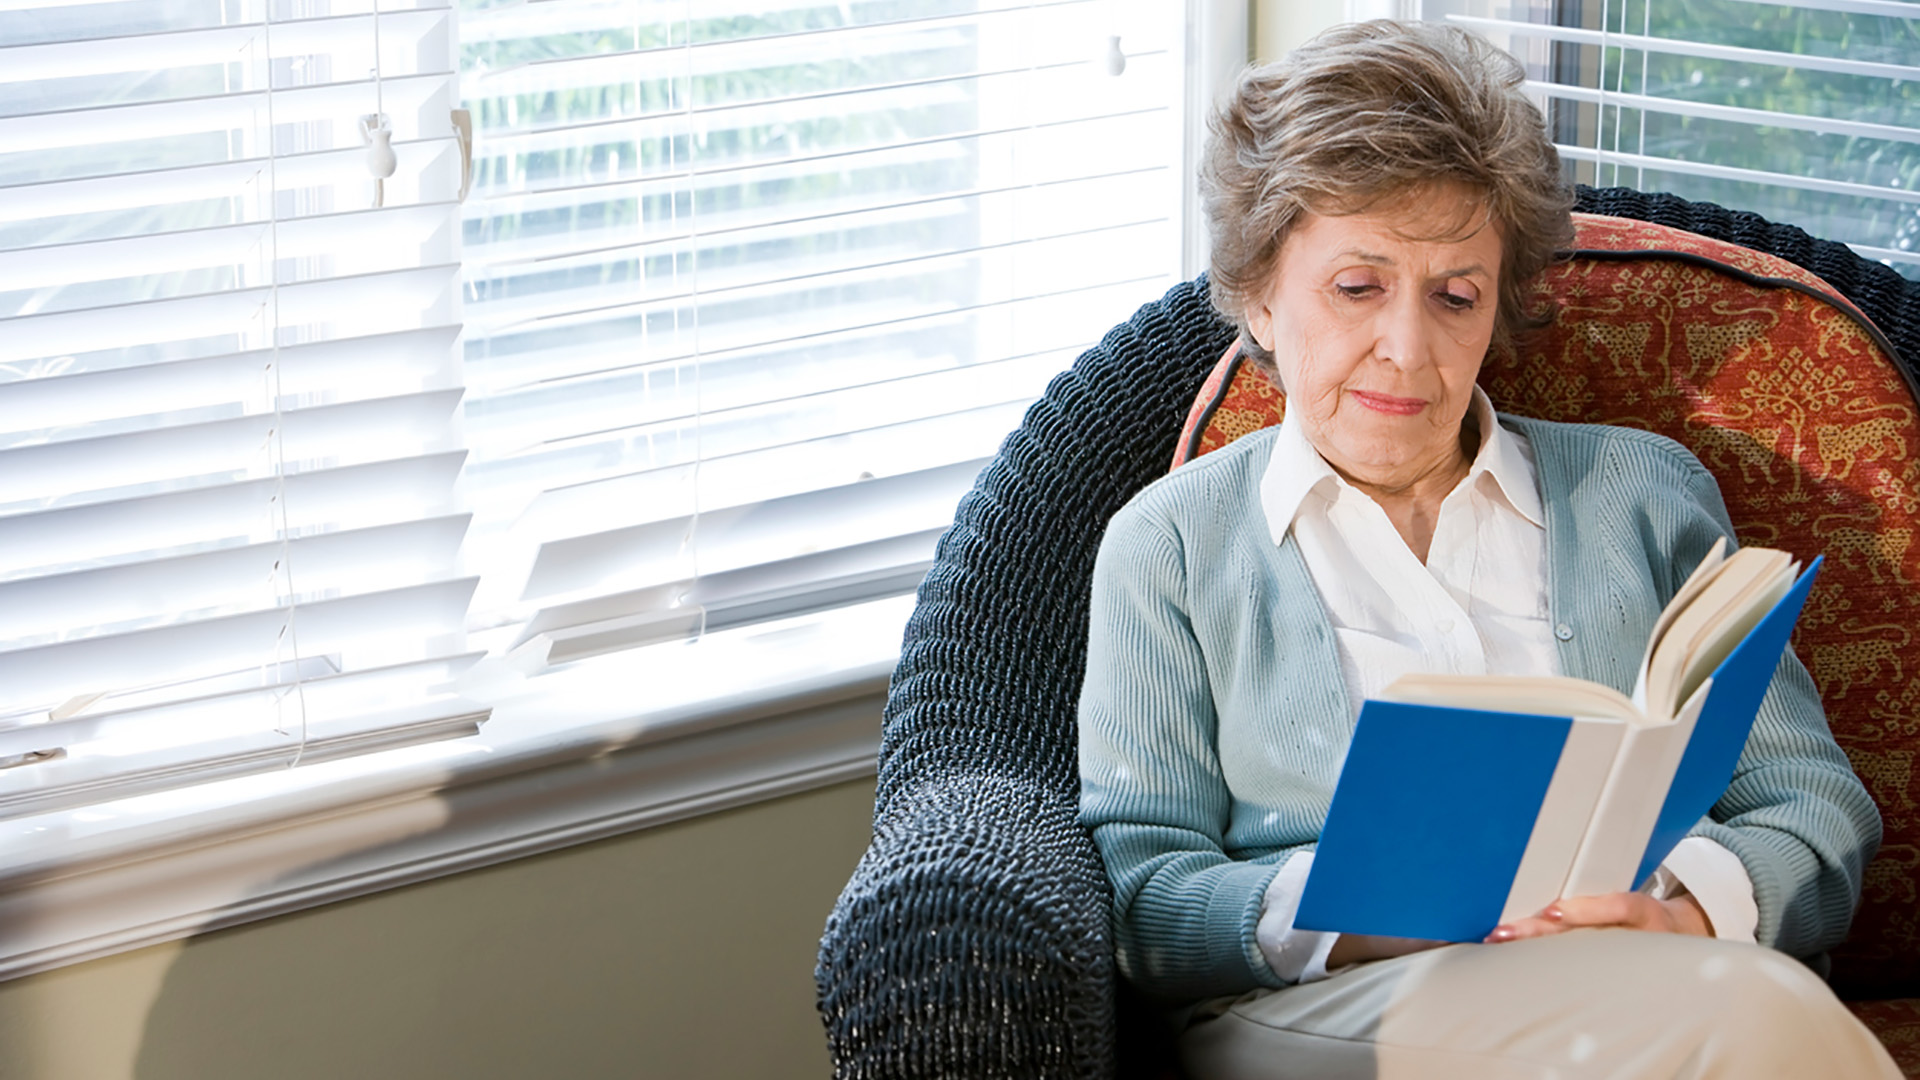 Featured image for “Introverts and Senior Living:  A Guide to a Happy Life”